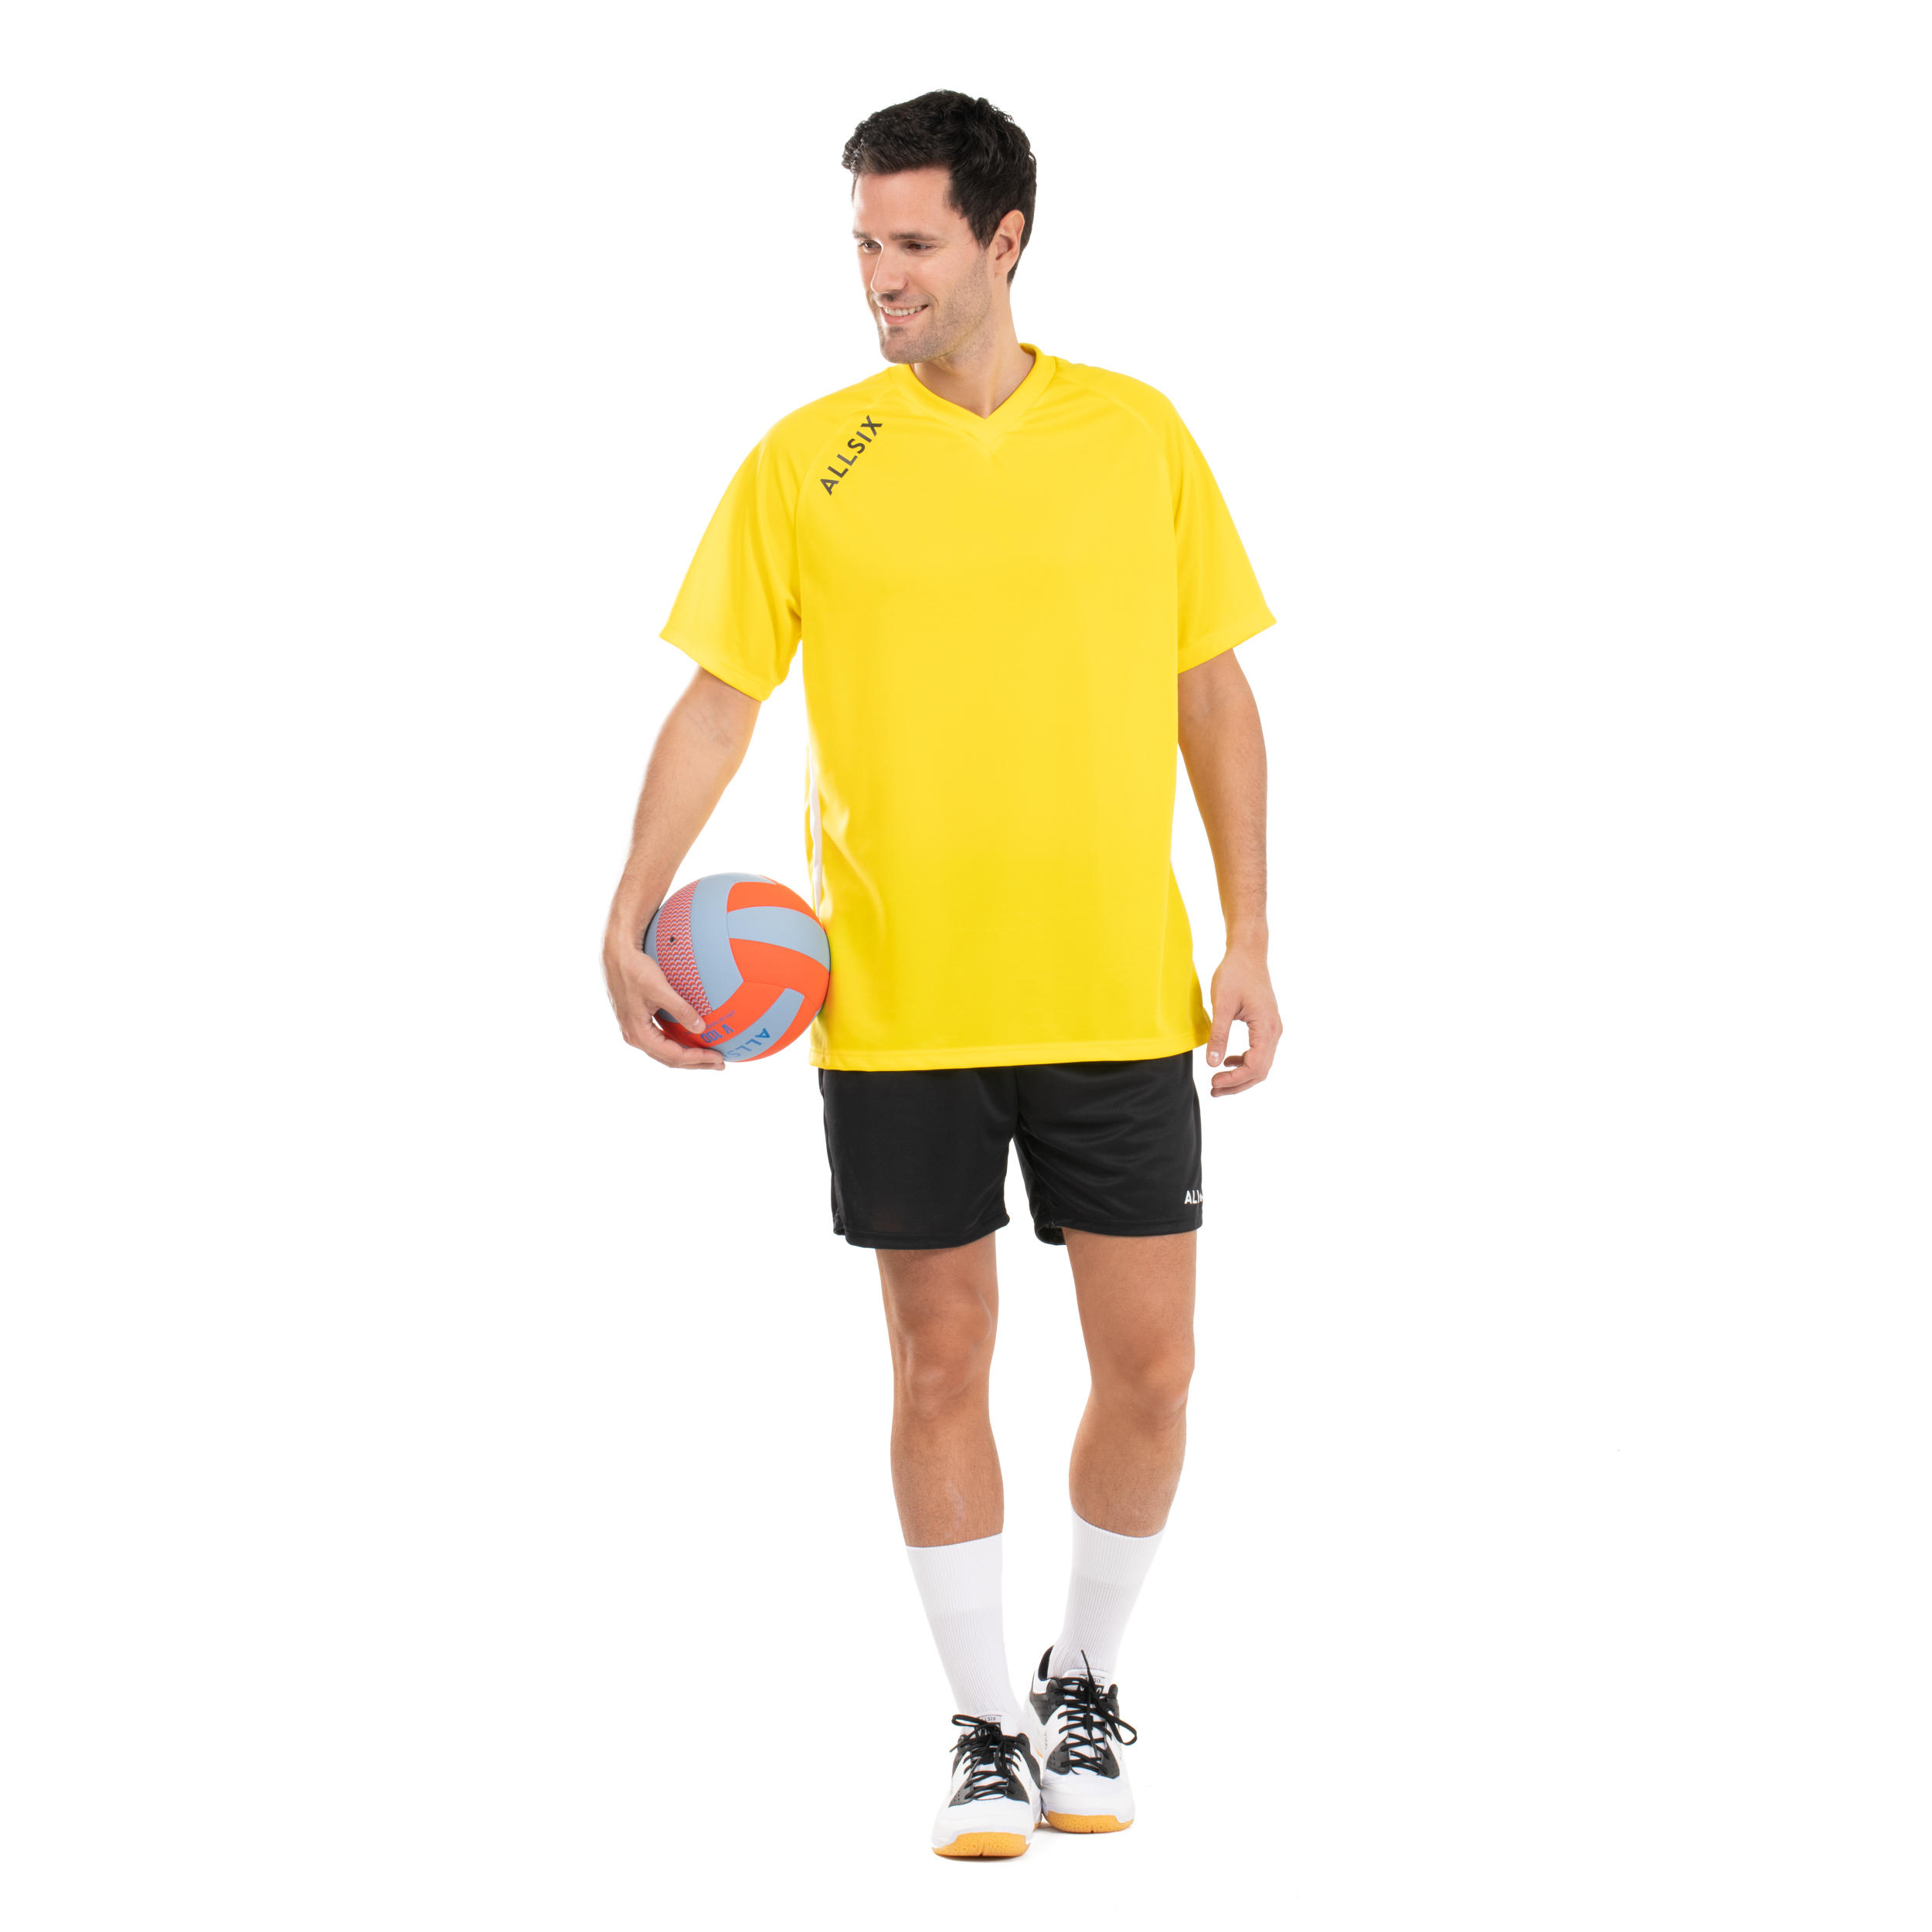 V100 Volleyball Jersey - Yellow 8/8